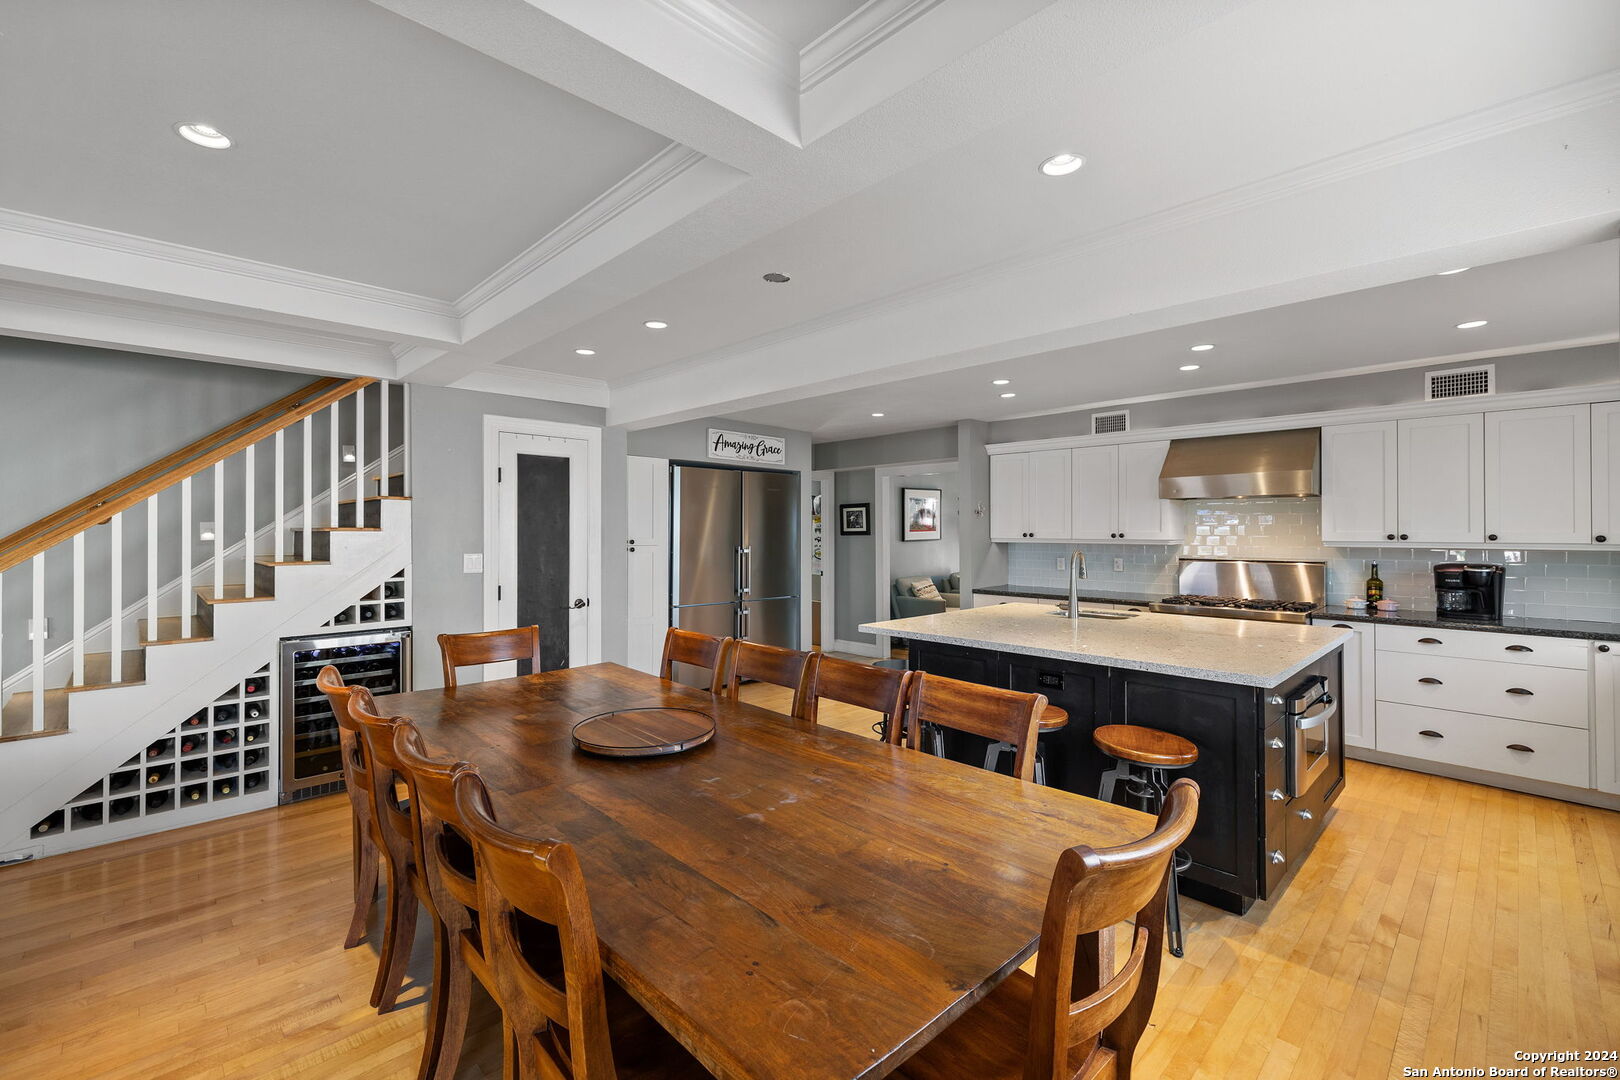 a dining hall with stainless steel appliances a dining table and chairs with wooden floor